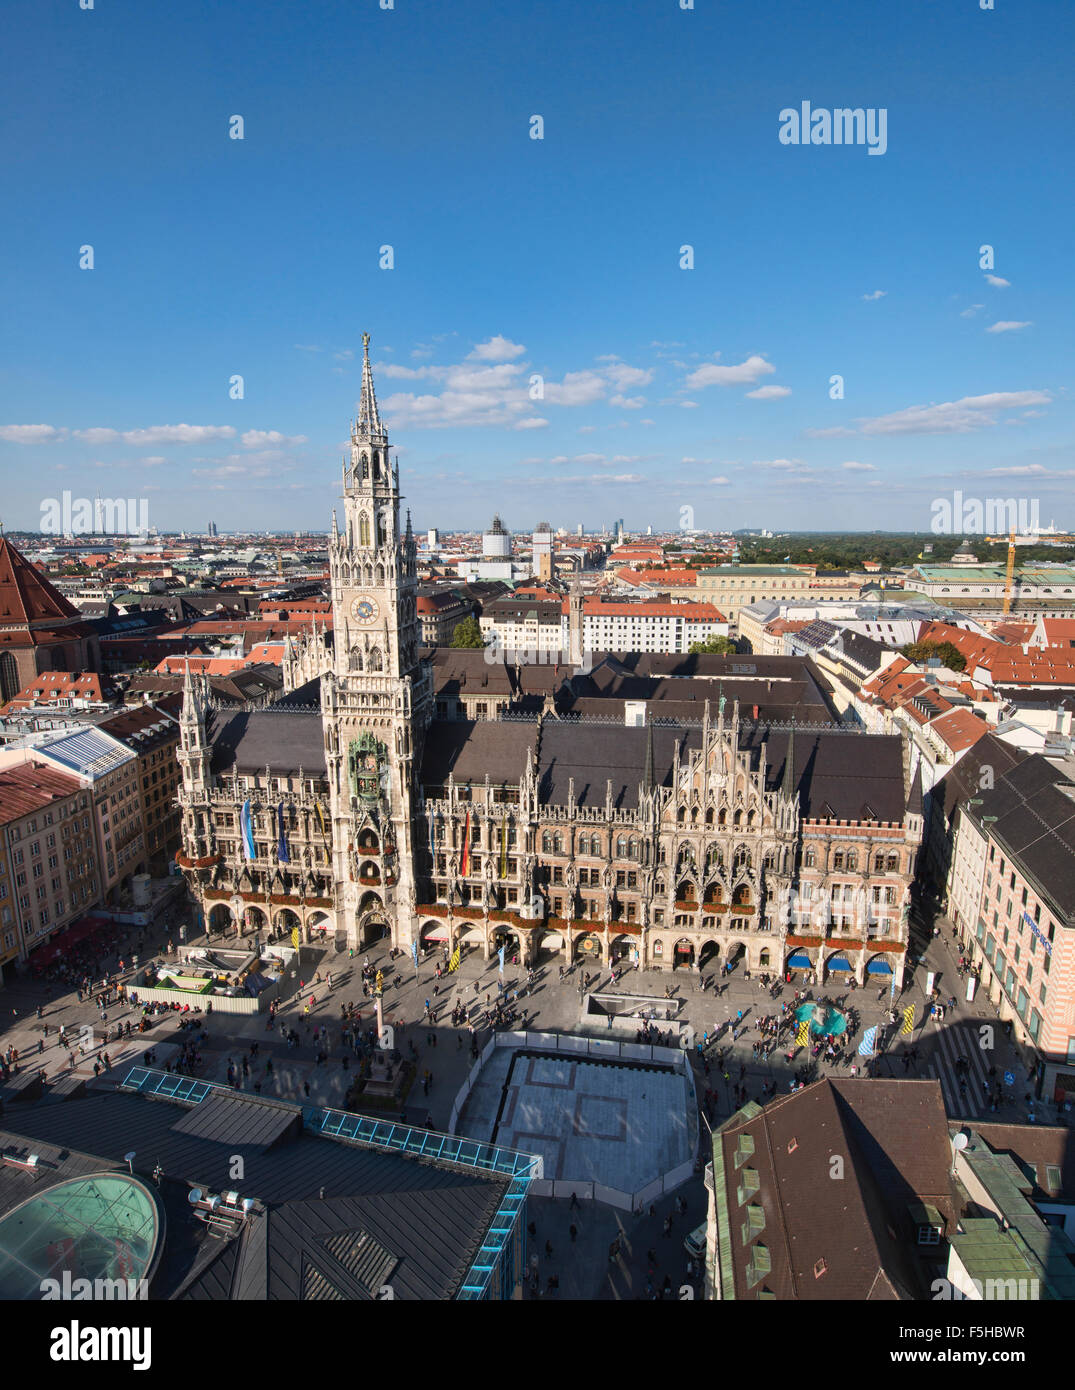 The beautiful Neue Rathaus town hall at the Marienplatz in Munich, Germany Stock Photo